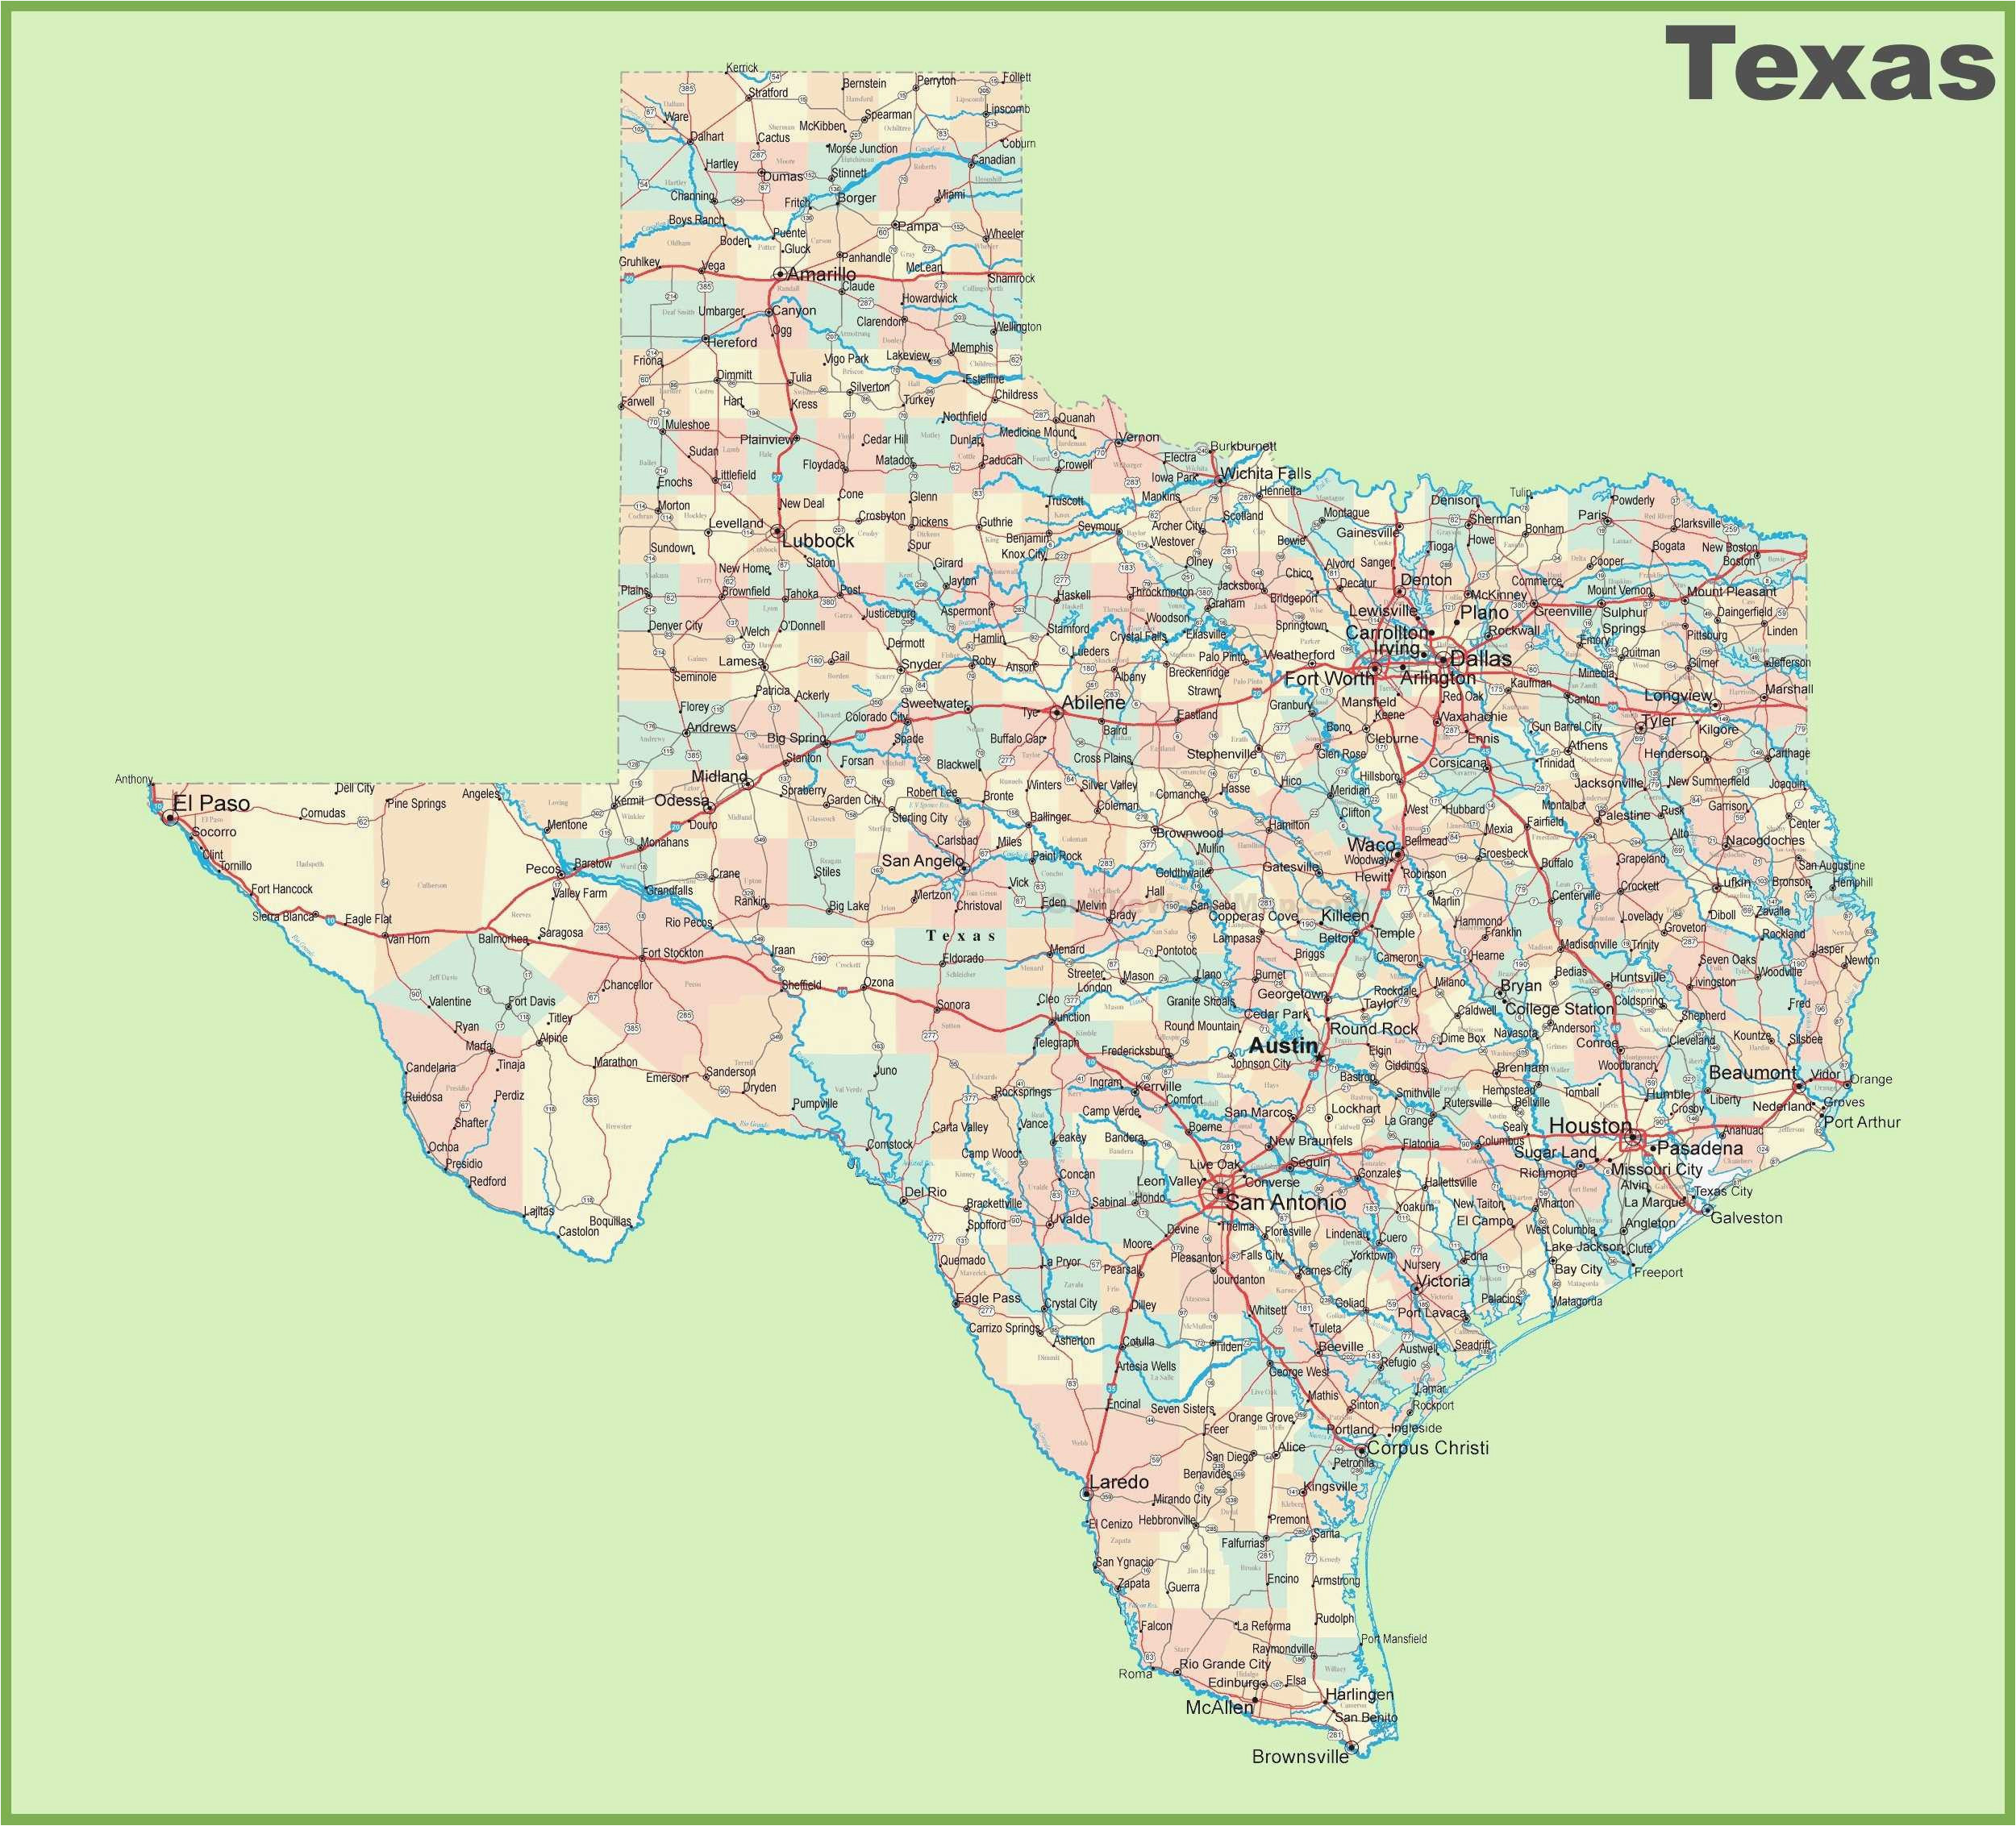 map of hot springs in the us inspirational unique texas map state